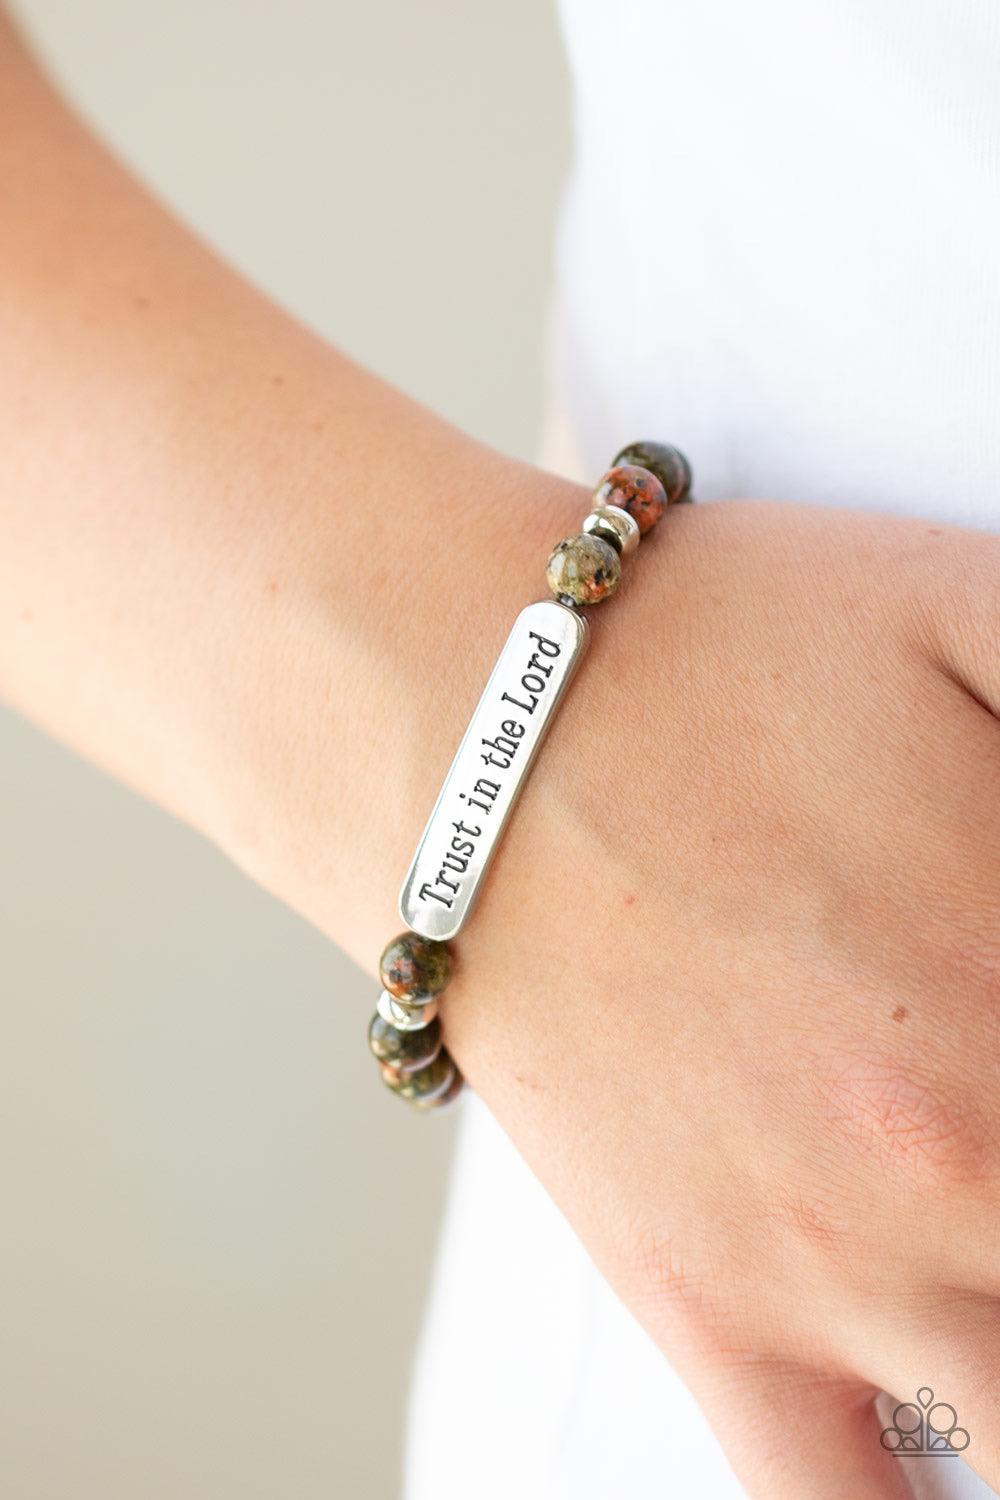 Paparazzi Accessories Trust Always - Multi Infused with dainty silver accents, a collection of glassy stone beads and a shimmery silver frame stamped in the phrase, "Trust in the Lord", are threaded along a stretchy band around the wrist for an inspiratio